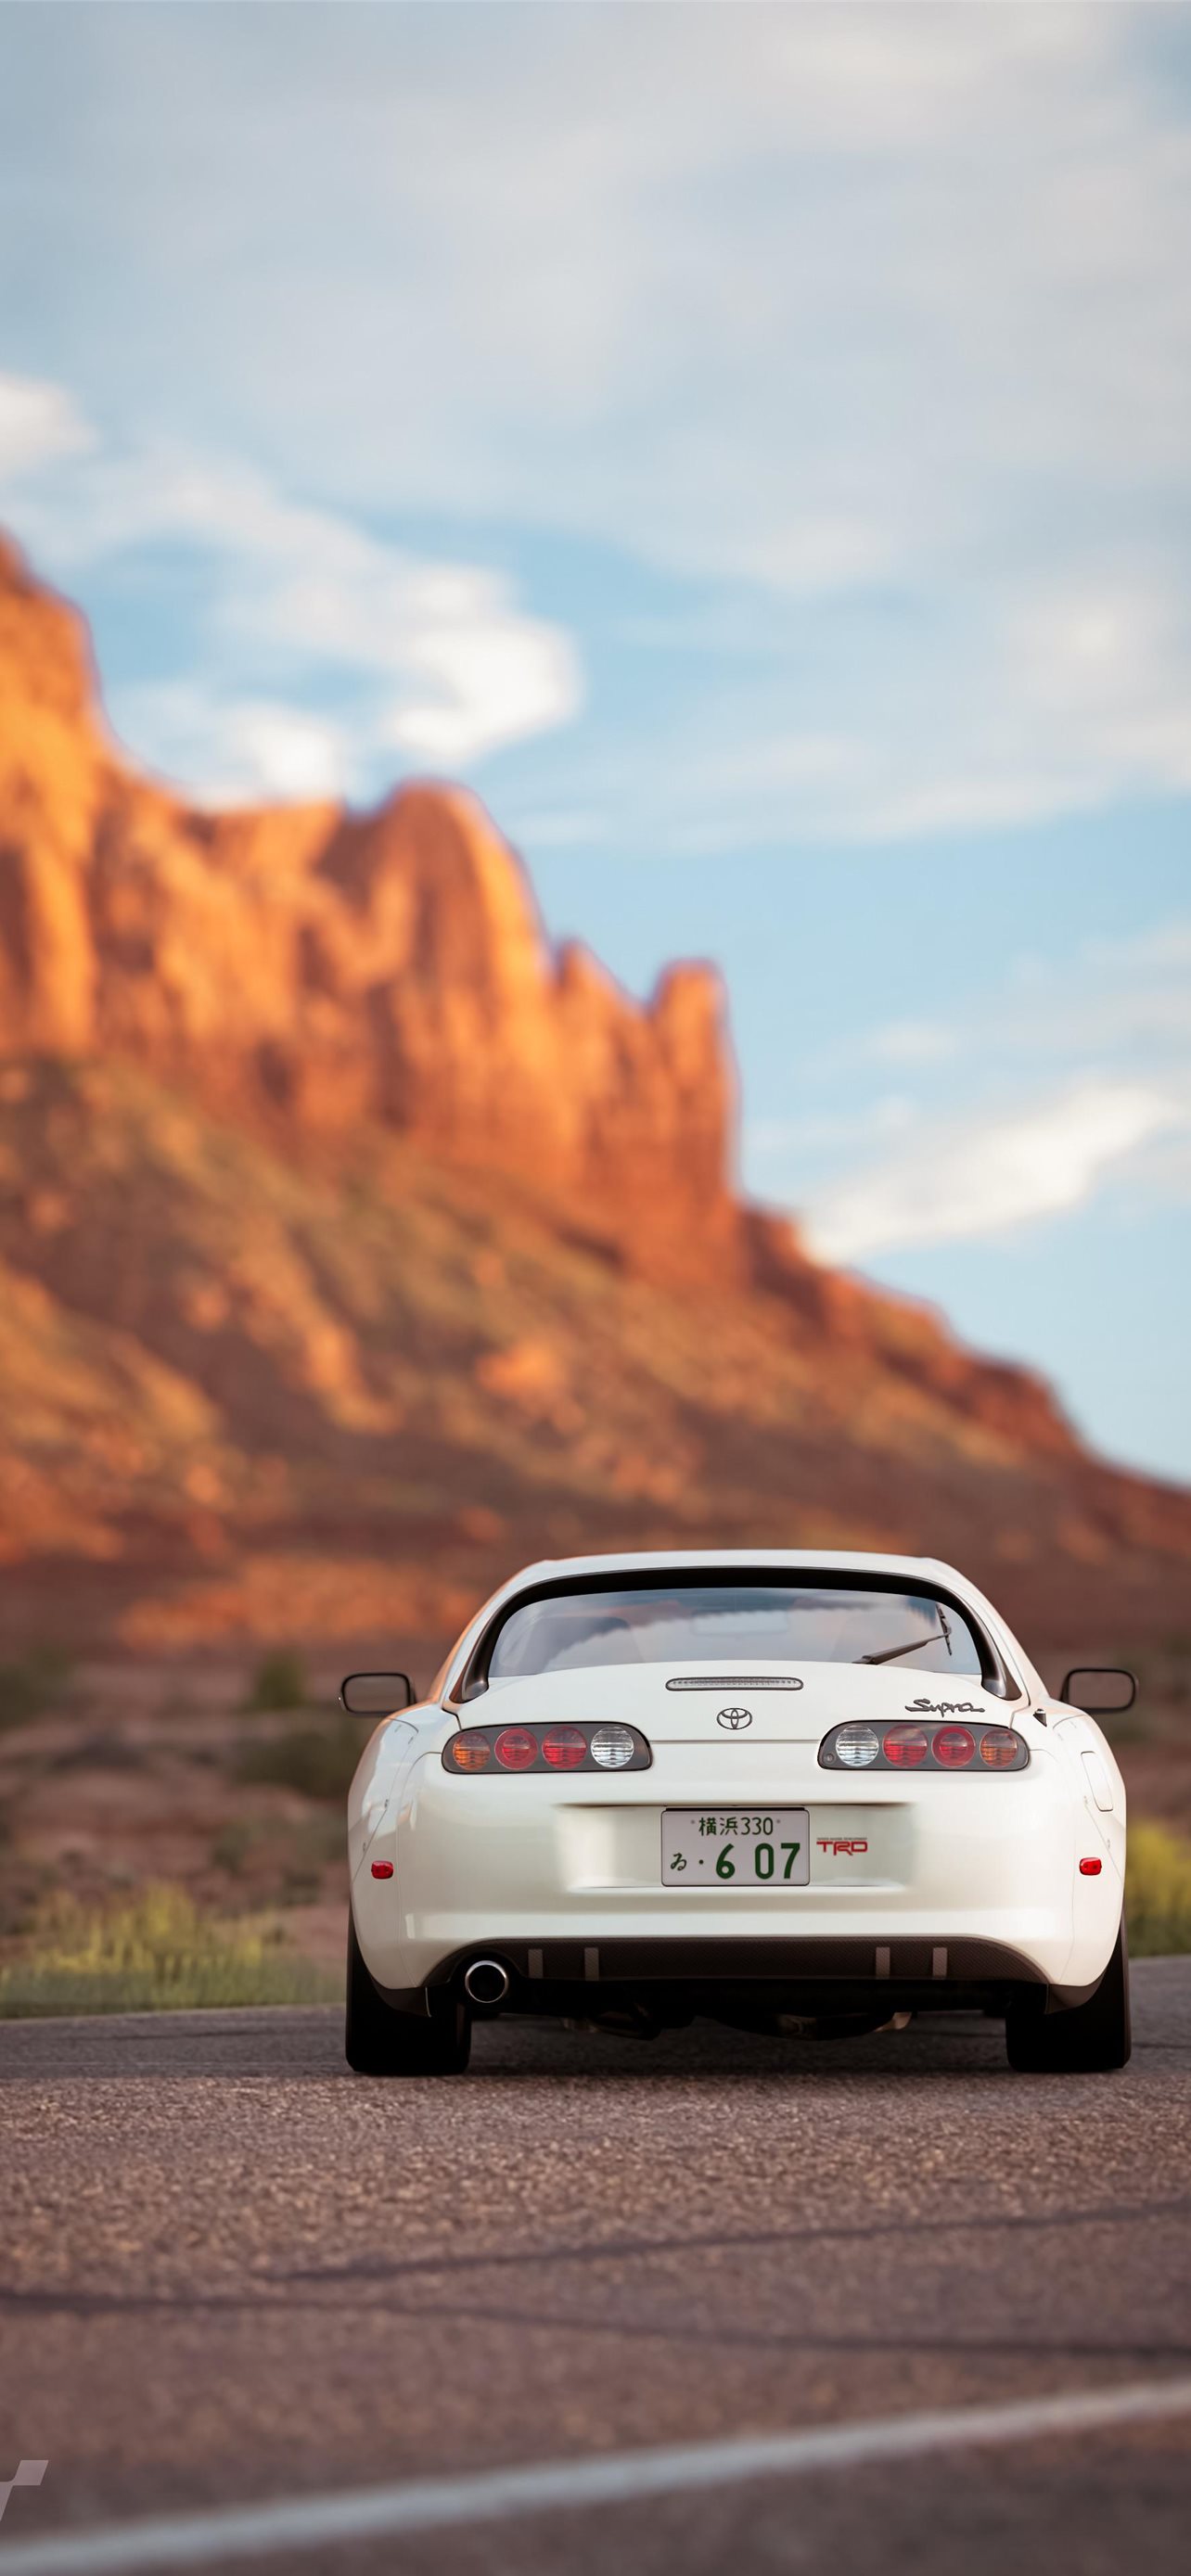 Toyota Supra Iphone Plus And Iphone Wallpapers Toyota Supra Iphone Wallpaper  Toyota Supra Iphone Wallpaper Hd Wallpapers For Iphone  फट शयर